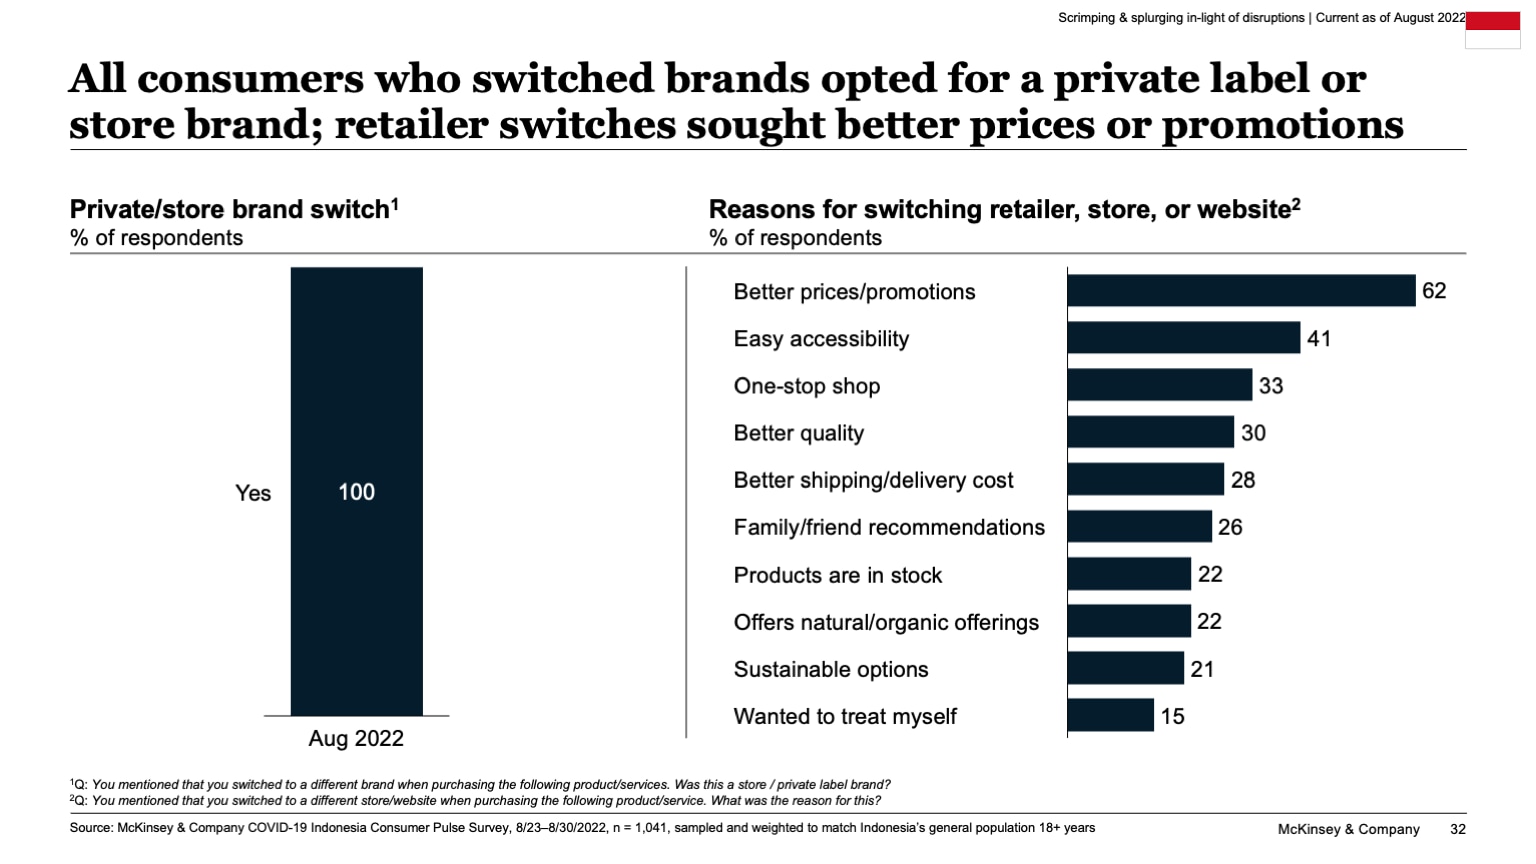 All consumers who switched brands opted for a private label or store brand; retailer switches sought better prices or promotions